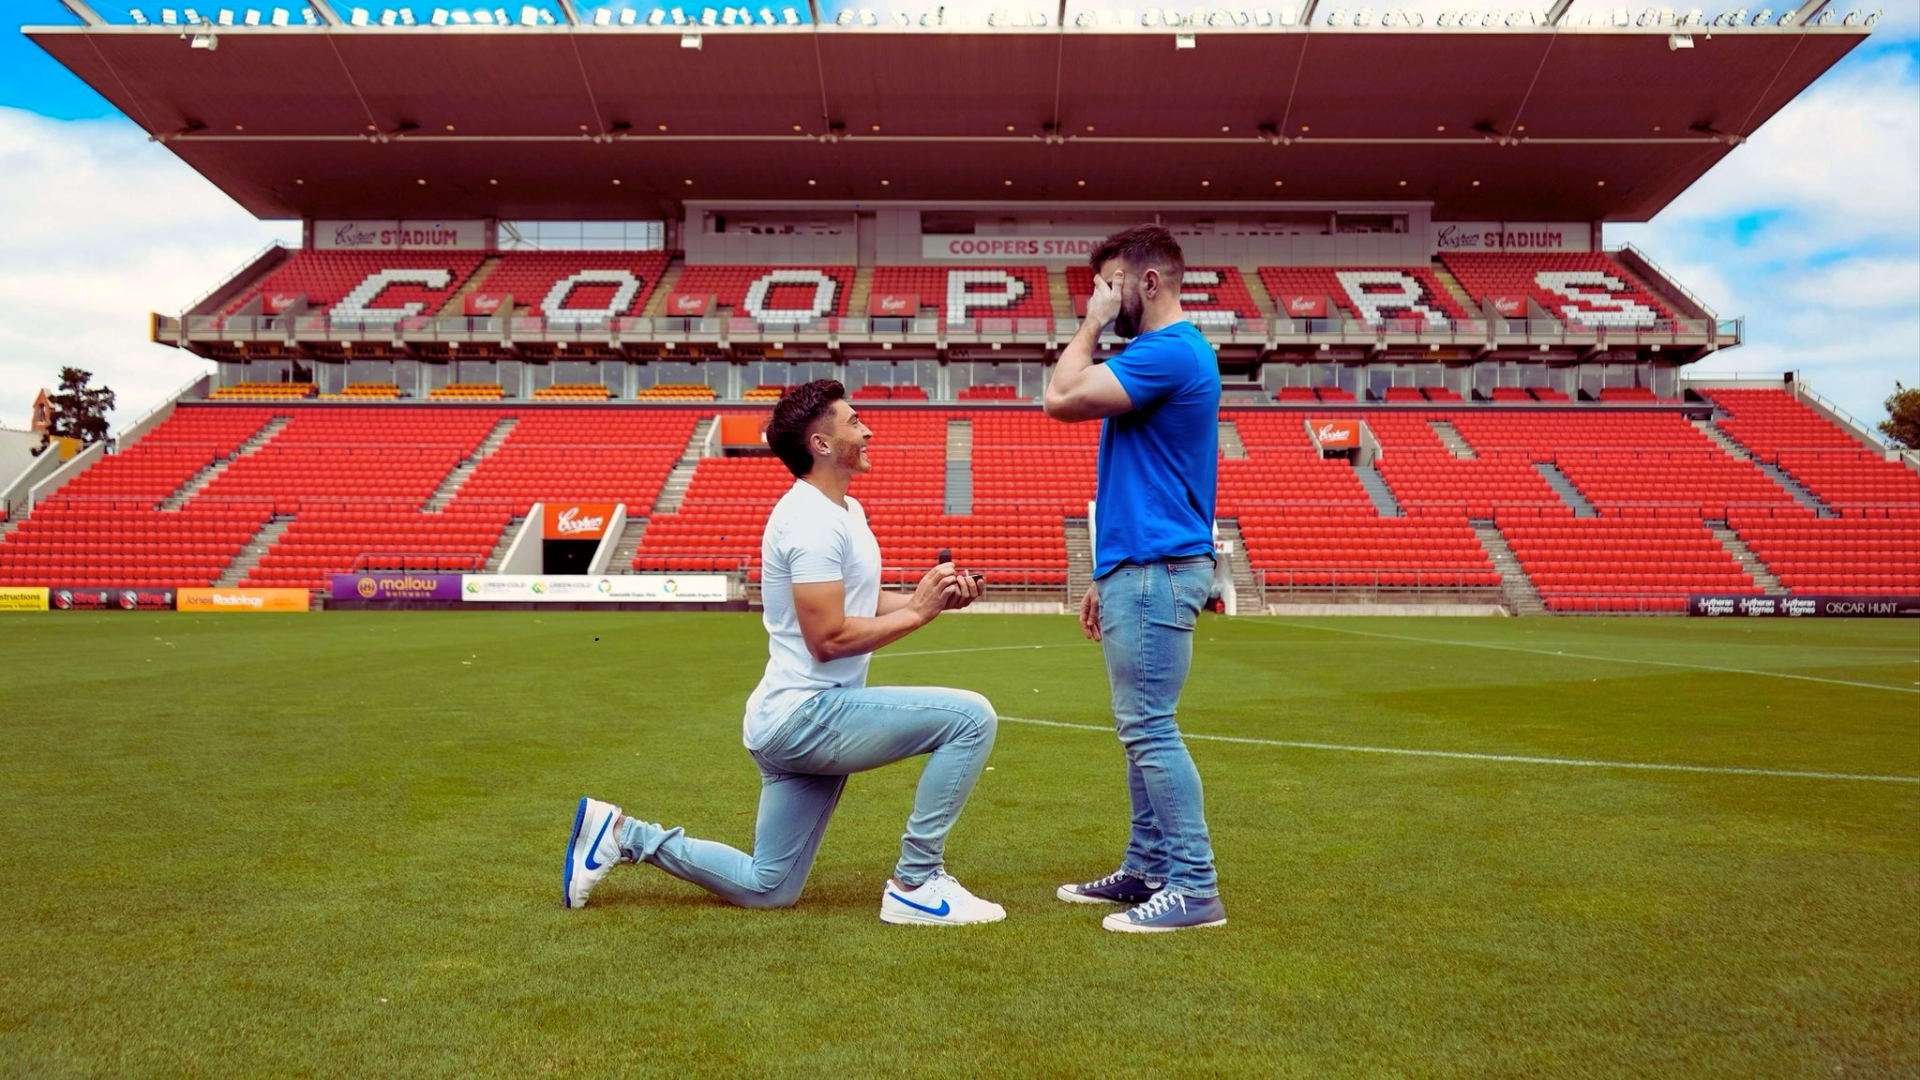 World’s 1st Openly-Gay Footballer’s Romantic Propose, Have A Look